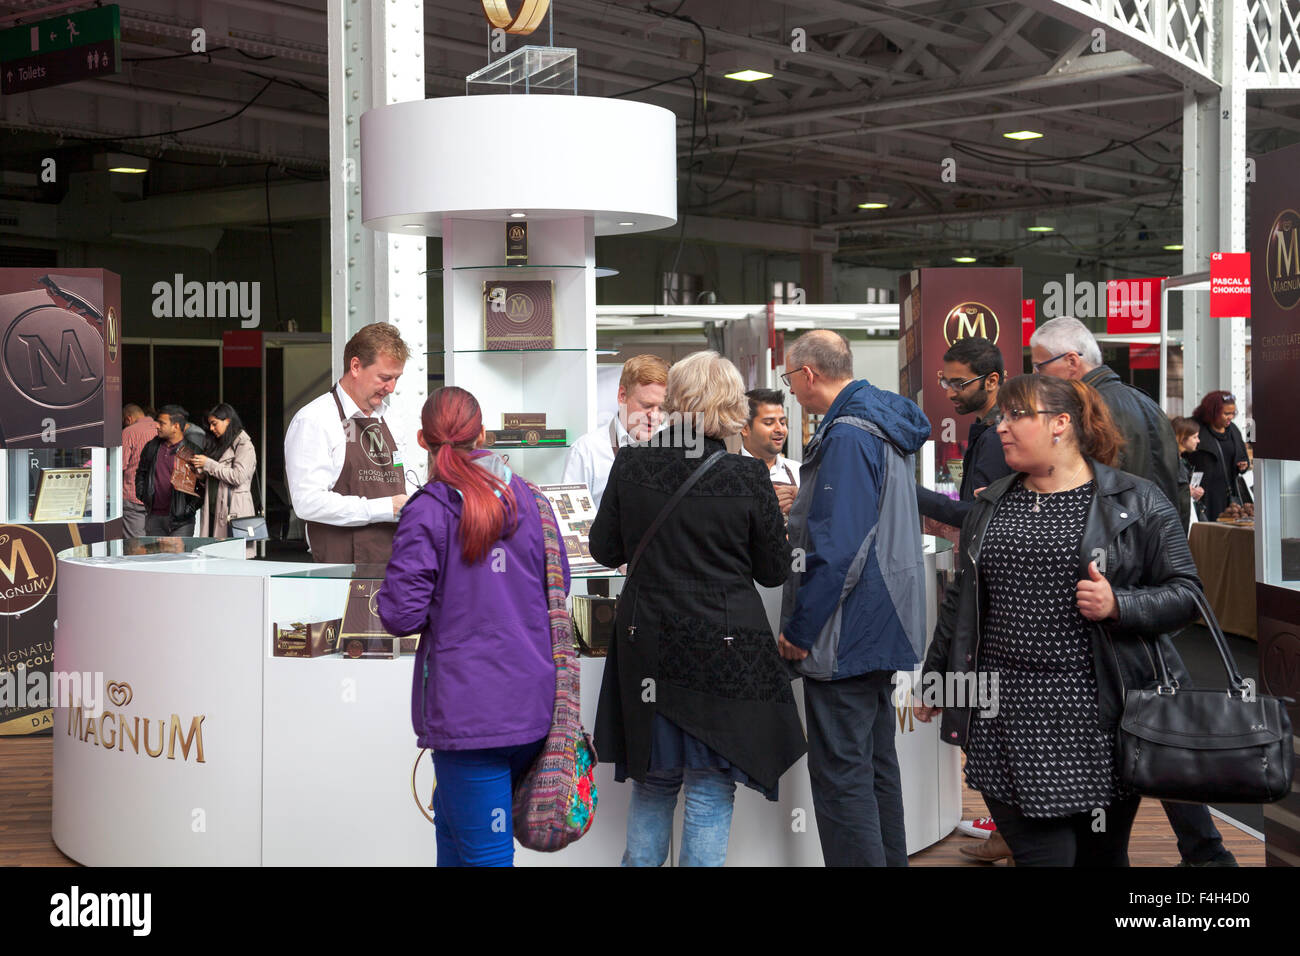 London, UK. 18th October 2015 - Magnum chocolate stall. International specialists from the chocolate industry gather at Olympia Hall to exhibit at the annual Chocolate Show in London, UK’s largest chocolate event. Activities include workshops, presentations by famous chefs, demonstrations and a chocolate fashion show. Credit: Nathaniel Noir/Alamy Live News Stock Photo